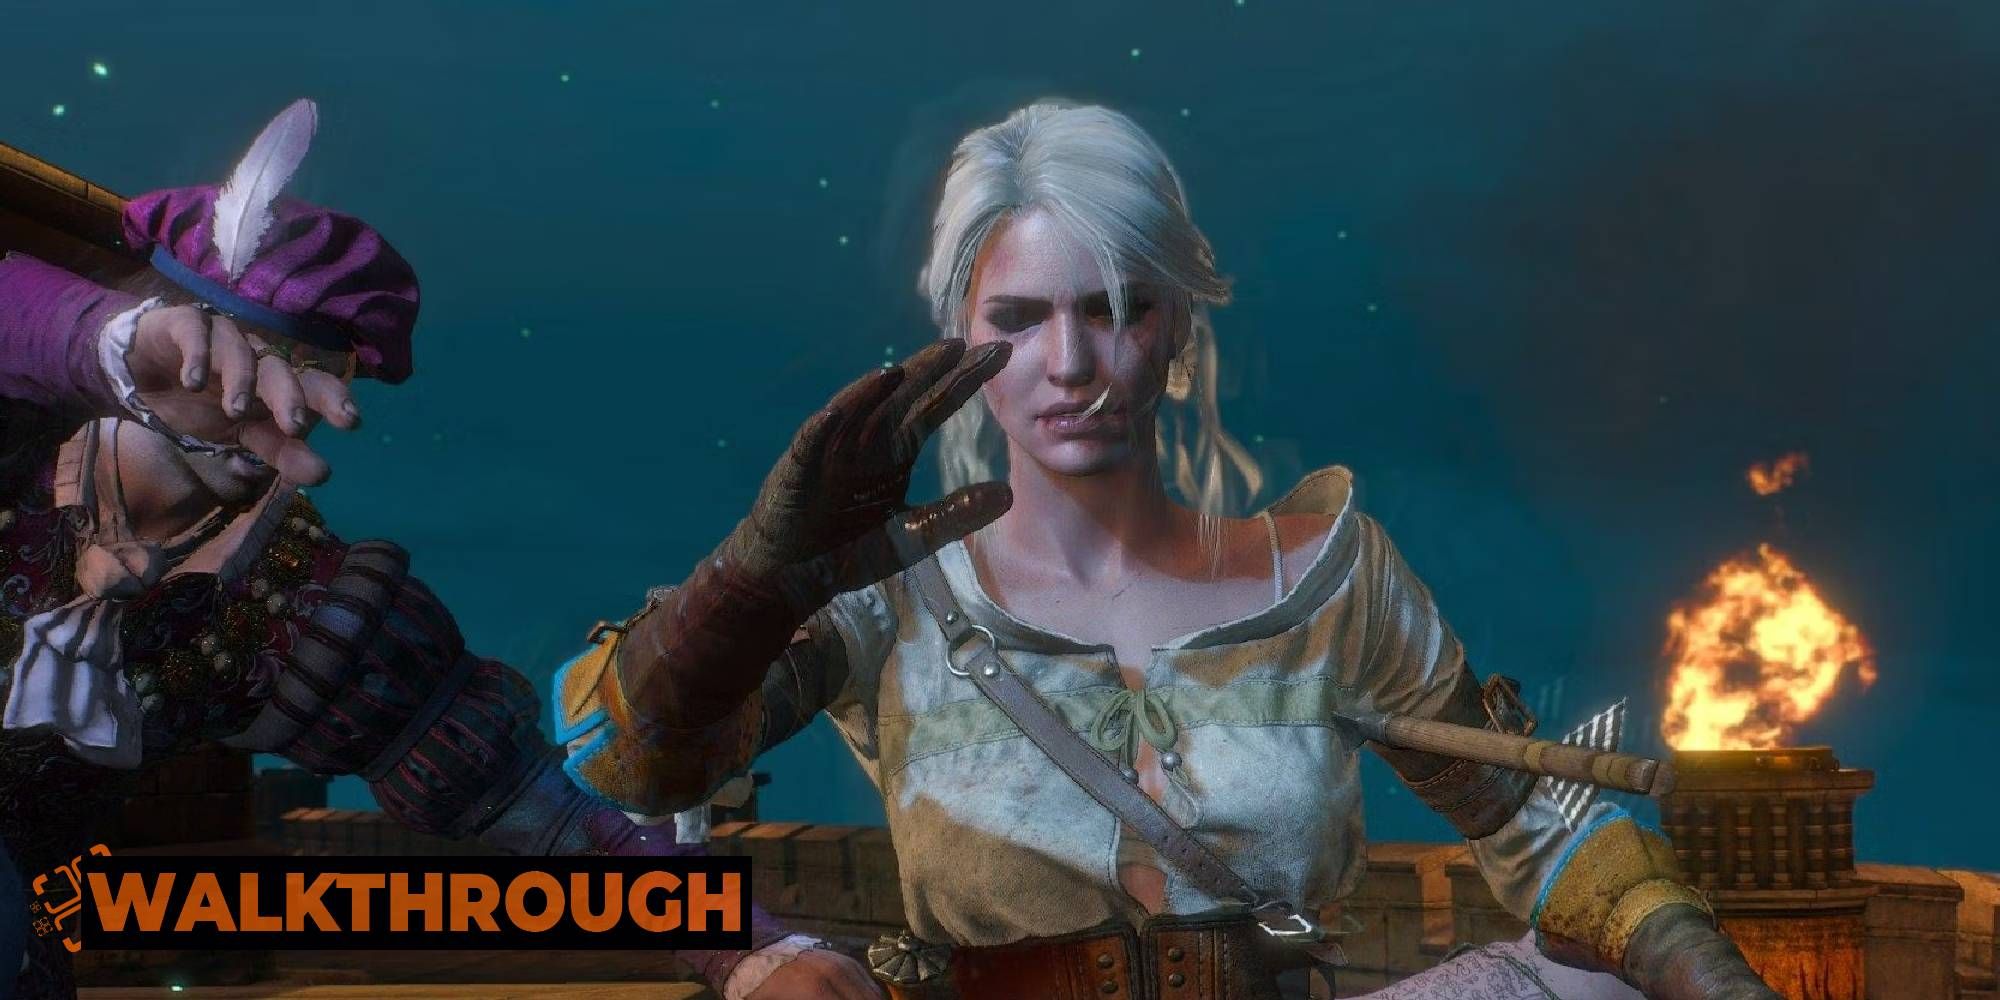 The Witcher 3 A Poet Under Pressure